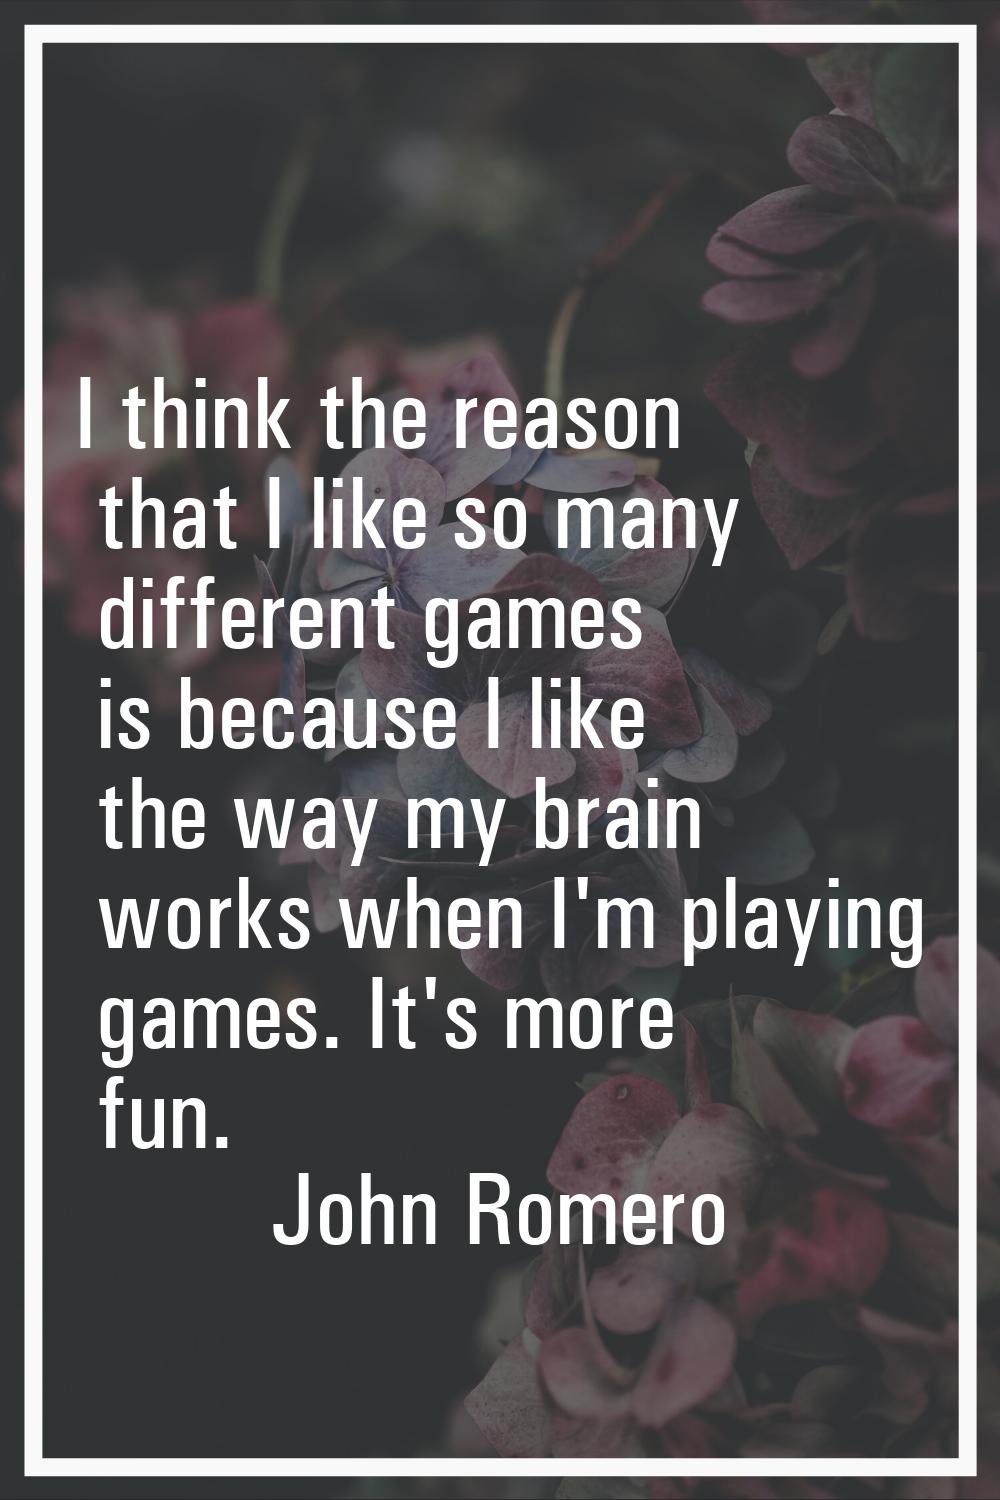 I think the reason that I like so many different games is because I like the way my brain works whe